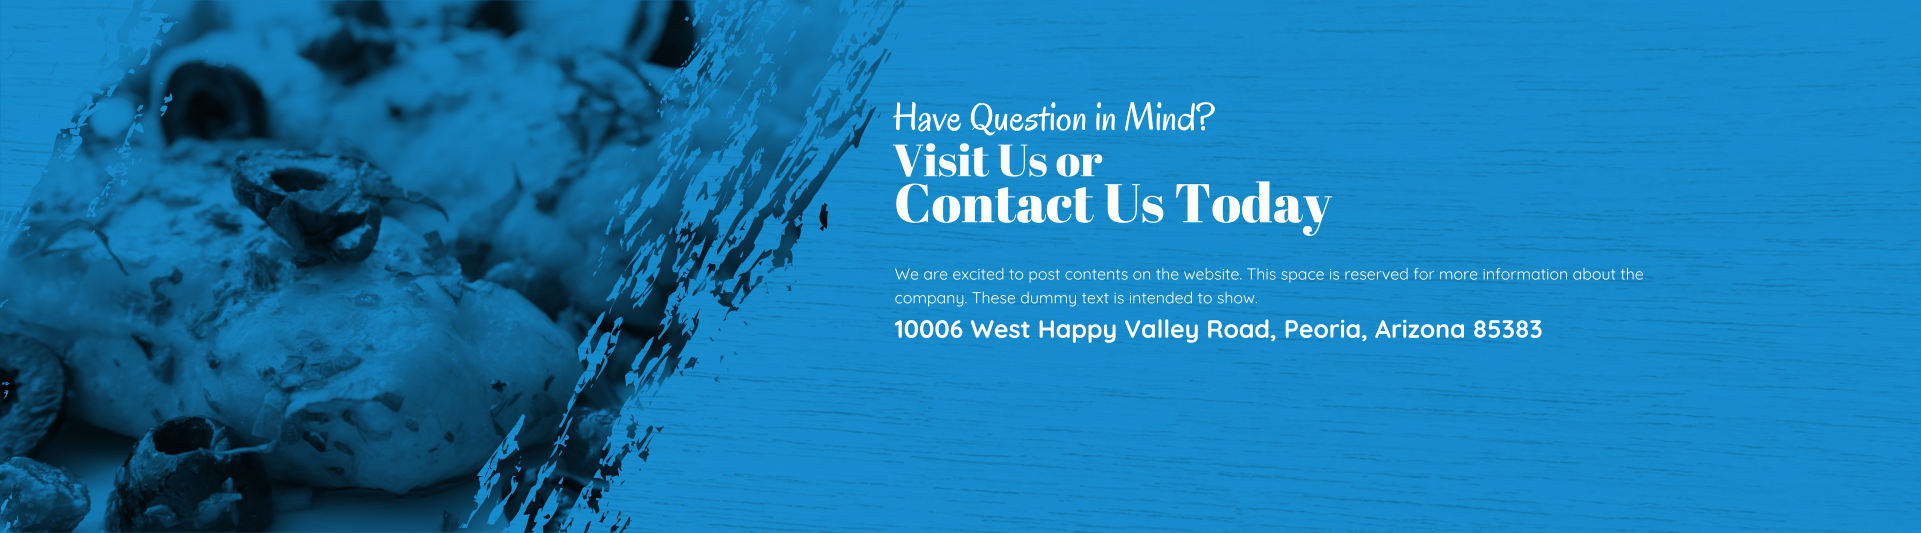 Visit Us or Contact Us Today Have Question in Mind? We are excited to post contents on the website. This space is reserved for more information about the company. These dummy text is intended to show. 10006 West Happy Valley Road, Peoria, Arizona 85383